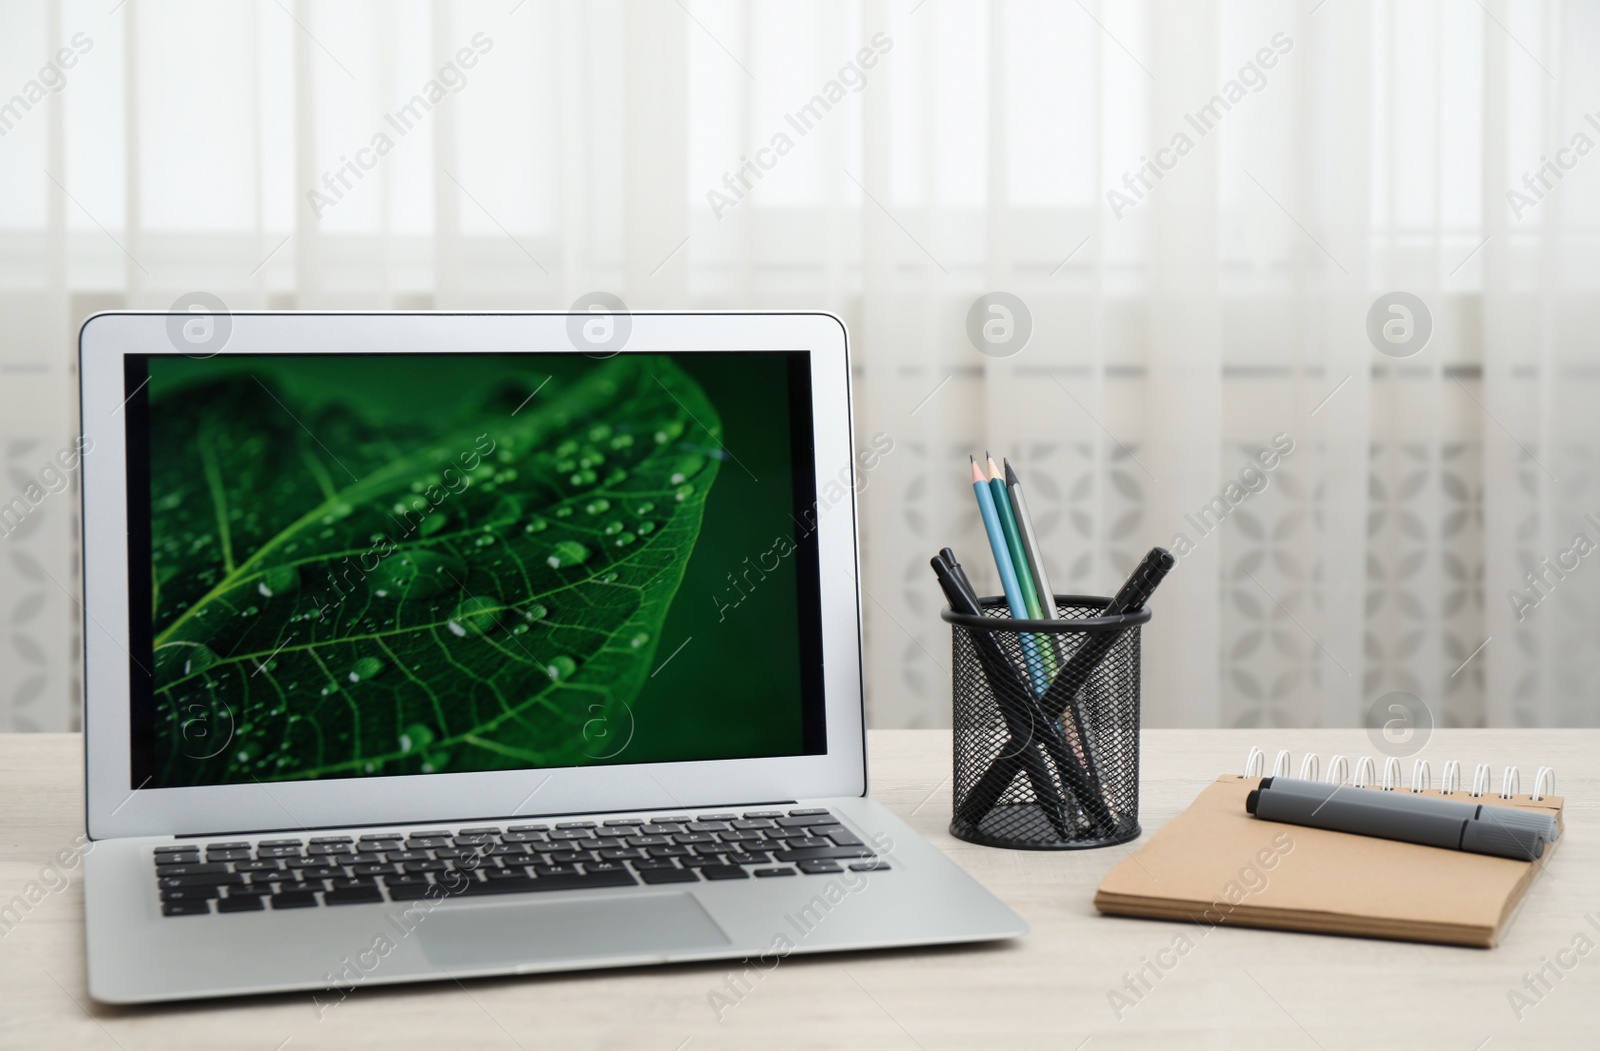 Photo of Modern laptop and supplies on wooden table indoors